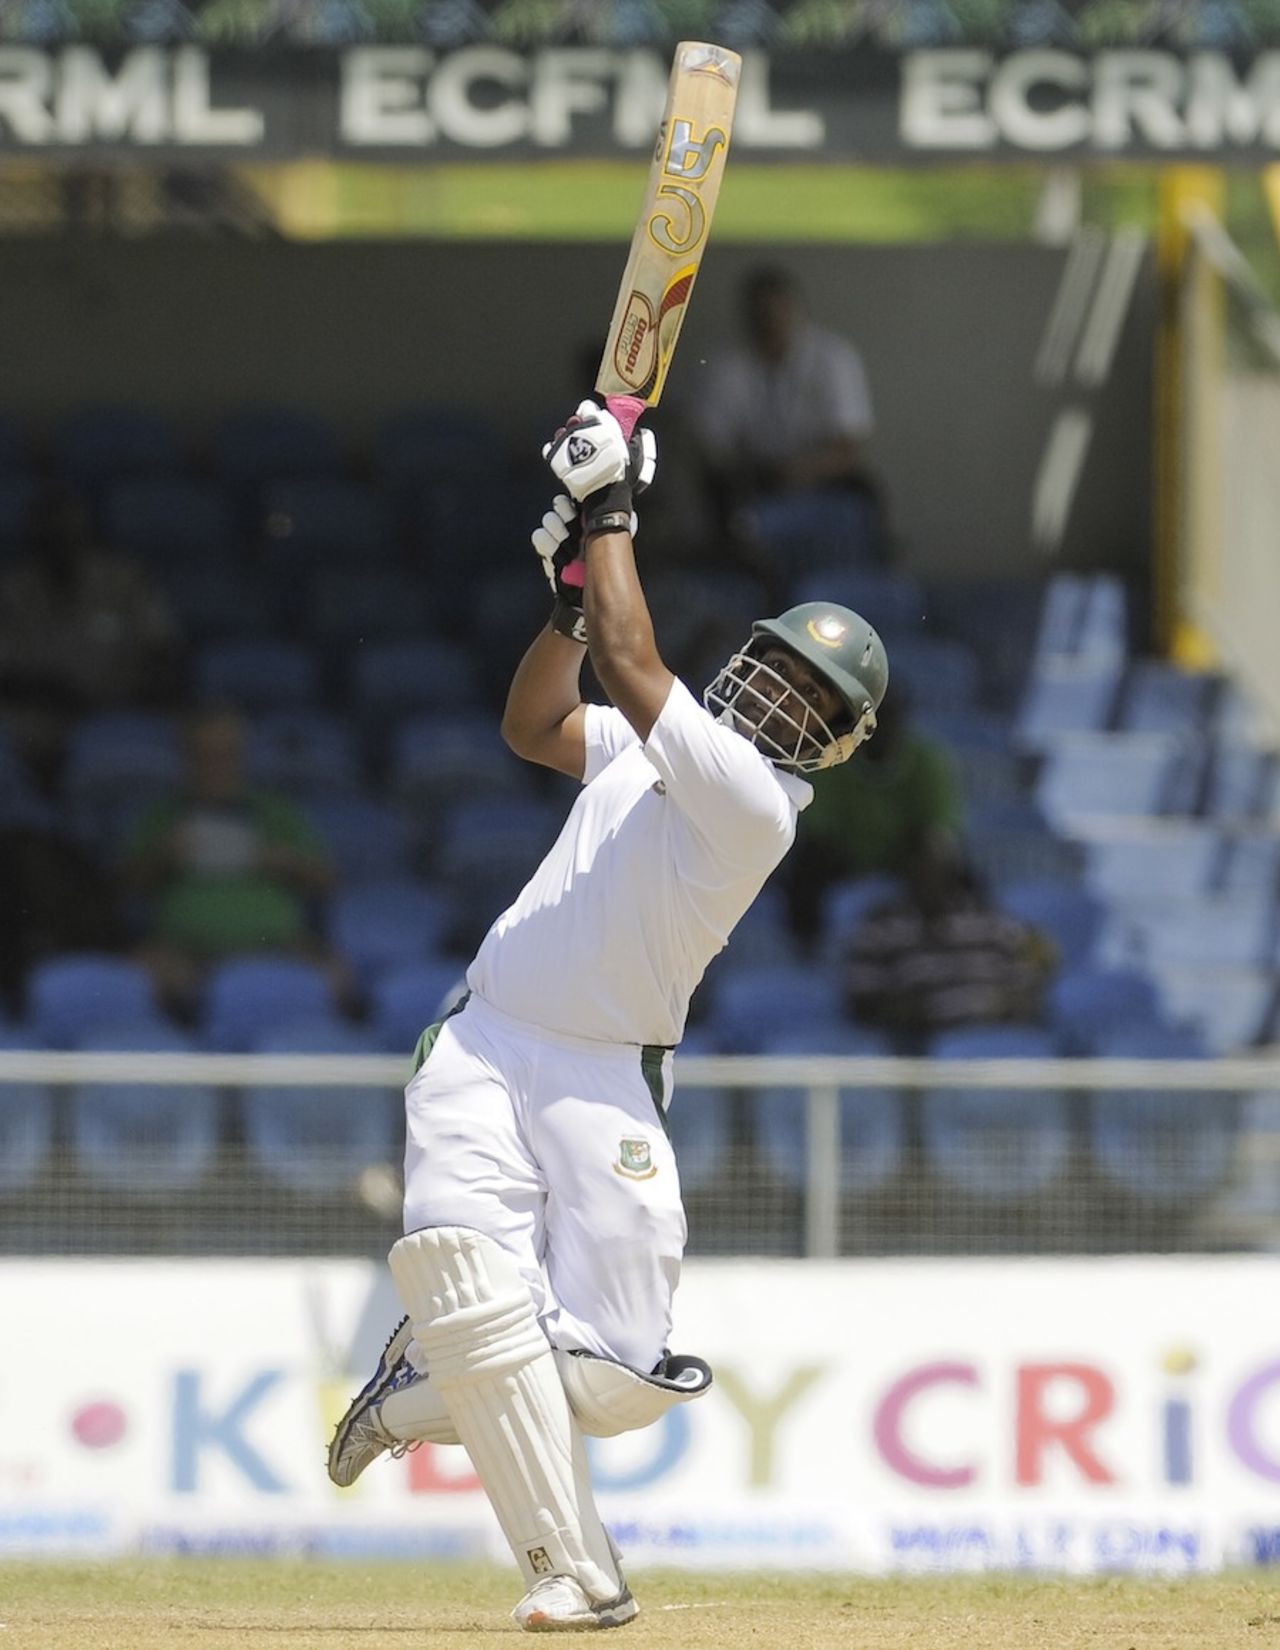 Tamim Iqbal hits a six, West Indies v Bangladesh, 1st Test, St. Vincent, 4th day, September 8, 2014